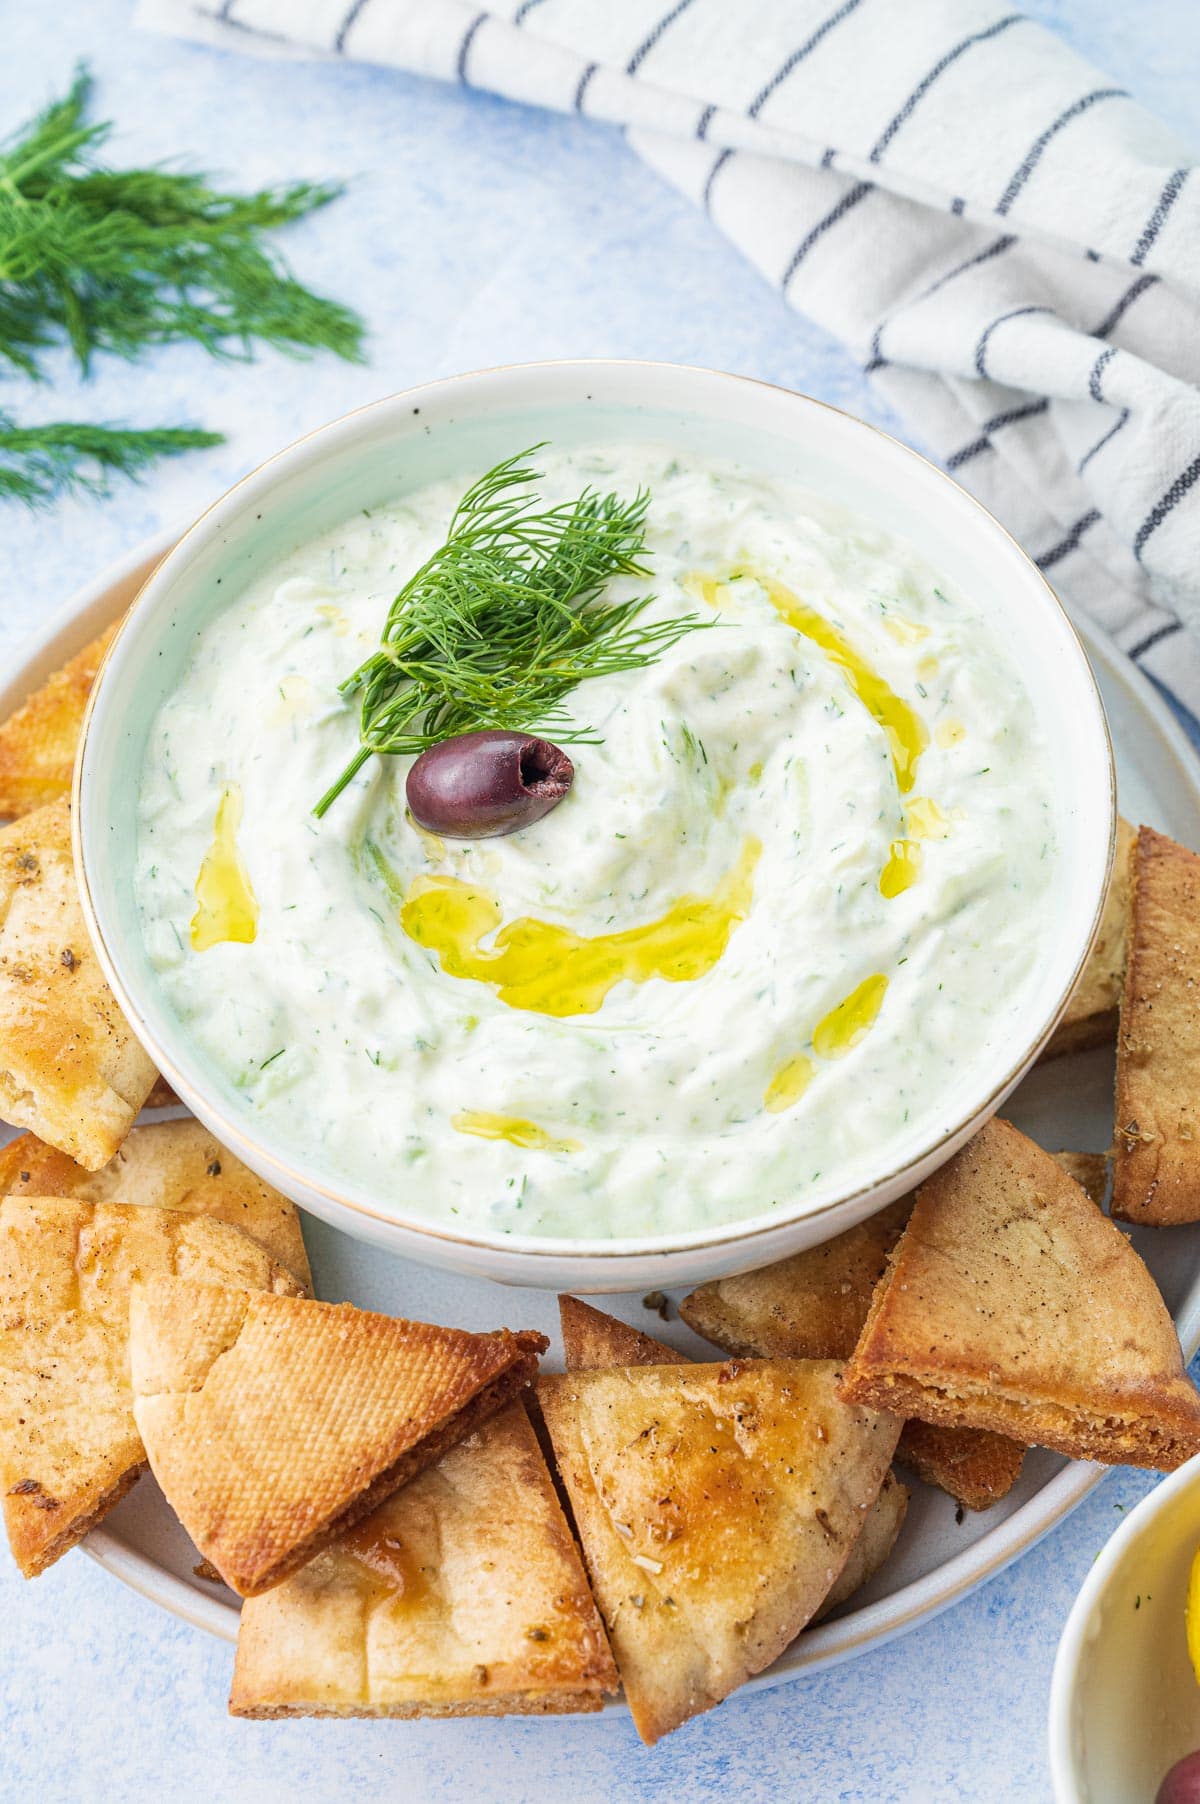 Tzatziki dip topped with dill, olive oil, and an olive in a white bowl.